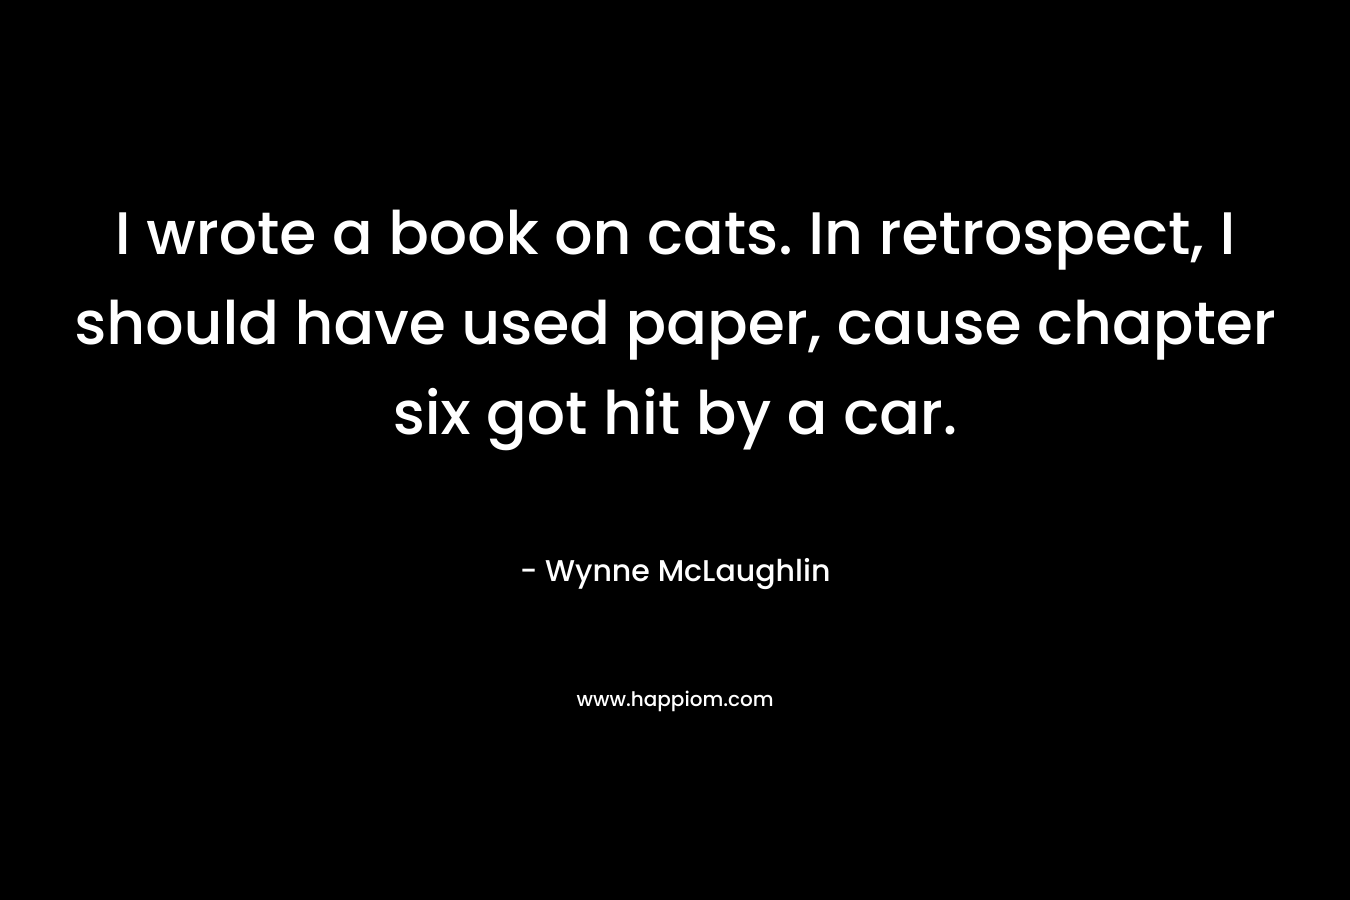 I wrote a book on cats. In retrospect, I should have used paper, cause chapter six got hit by a car. – Wynne McLaughlin